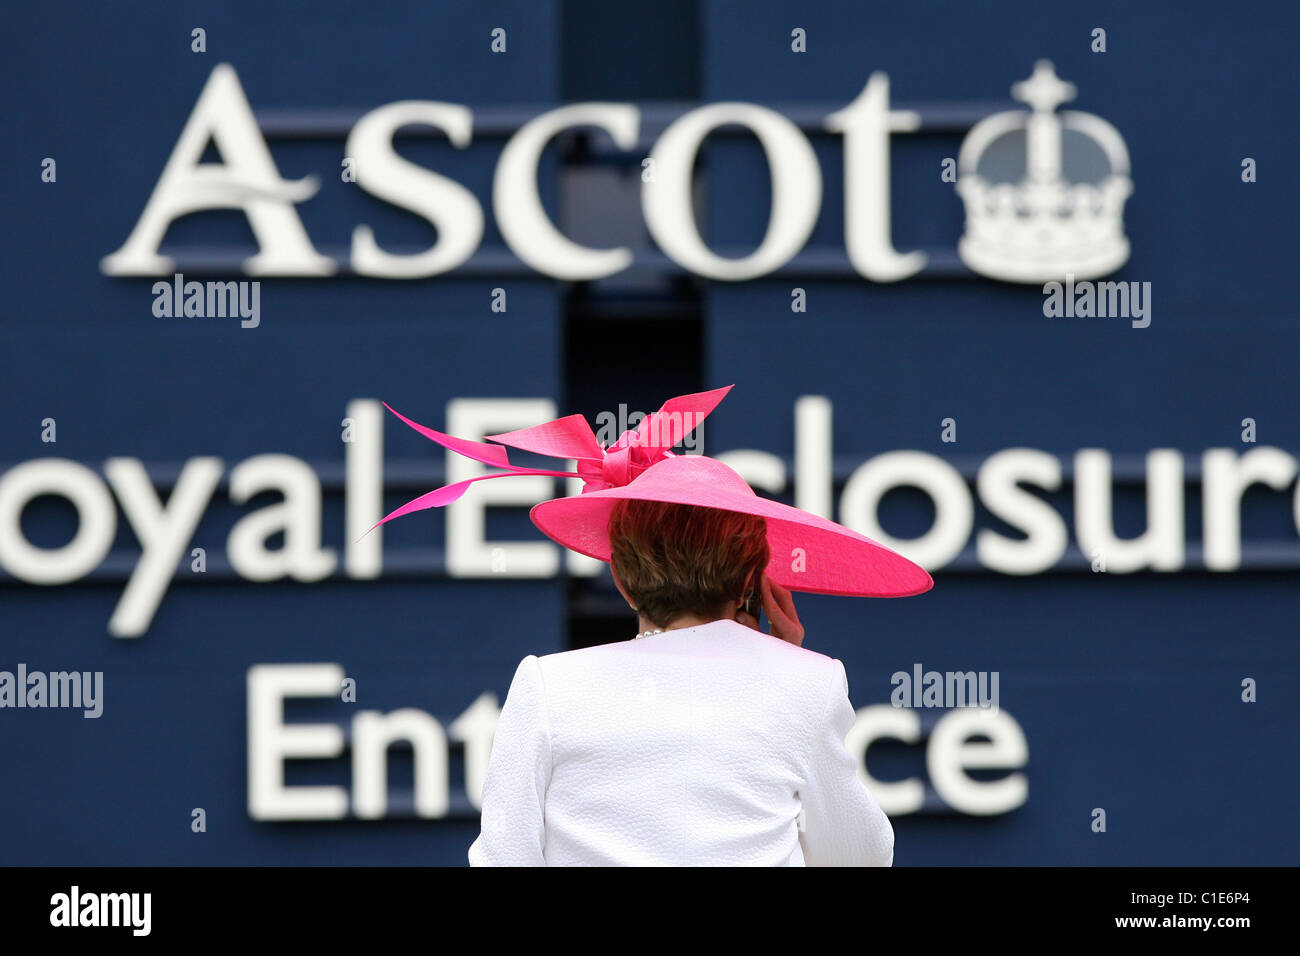 Woman in hat standing in front of the Royal Enclosure of the horse race track, Ascot, United Kingdom Stock Photo